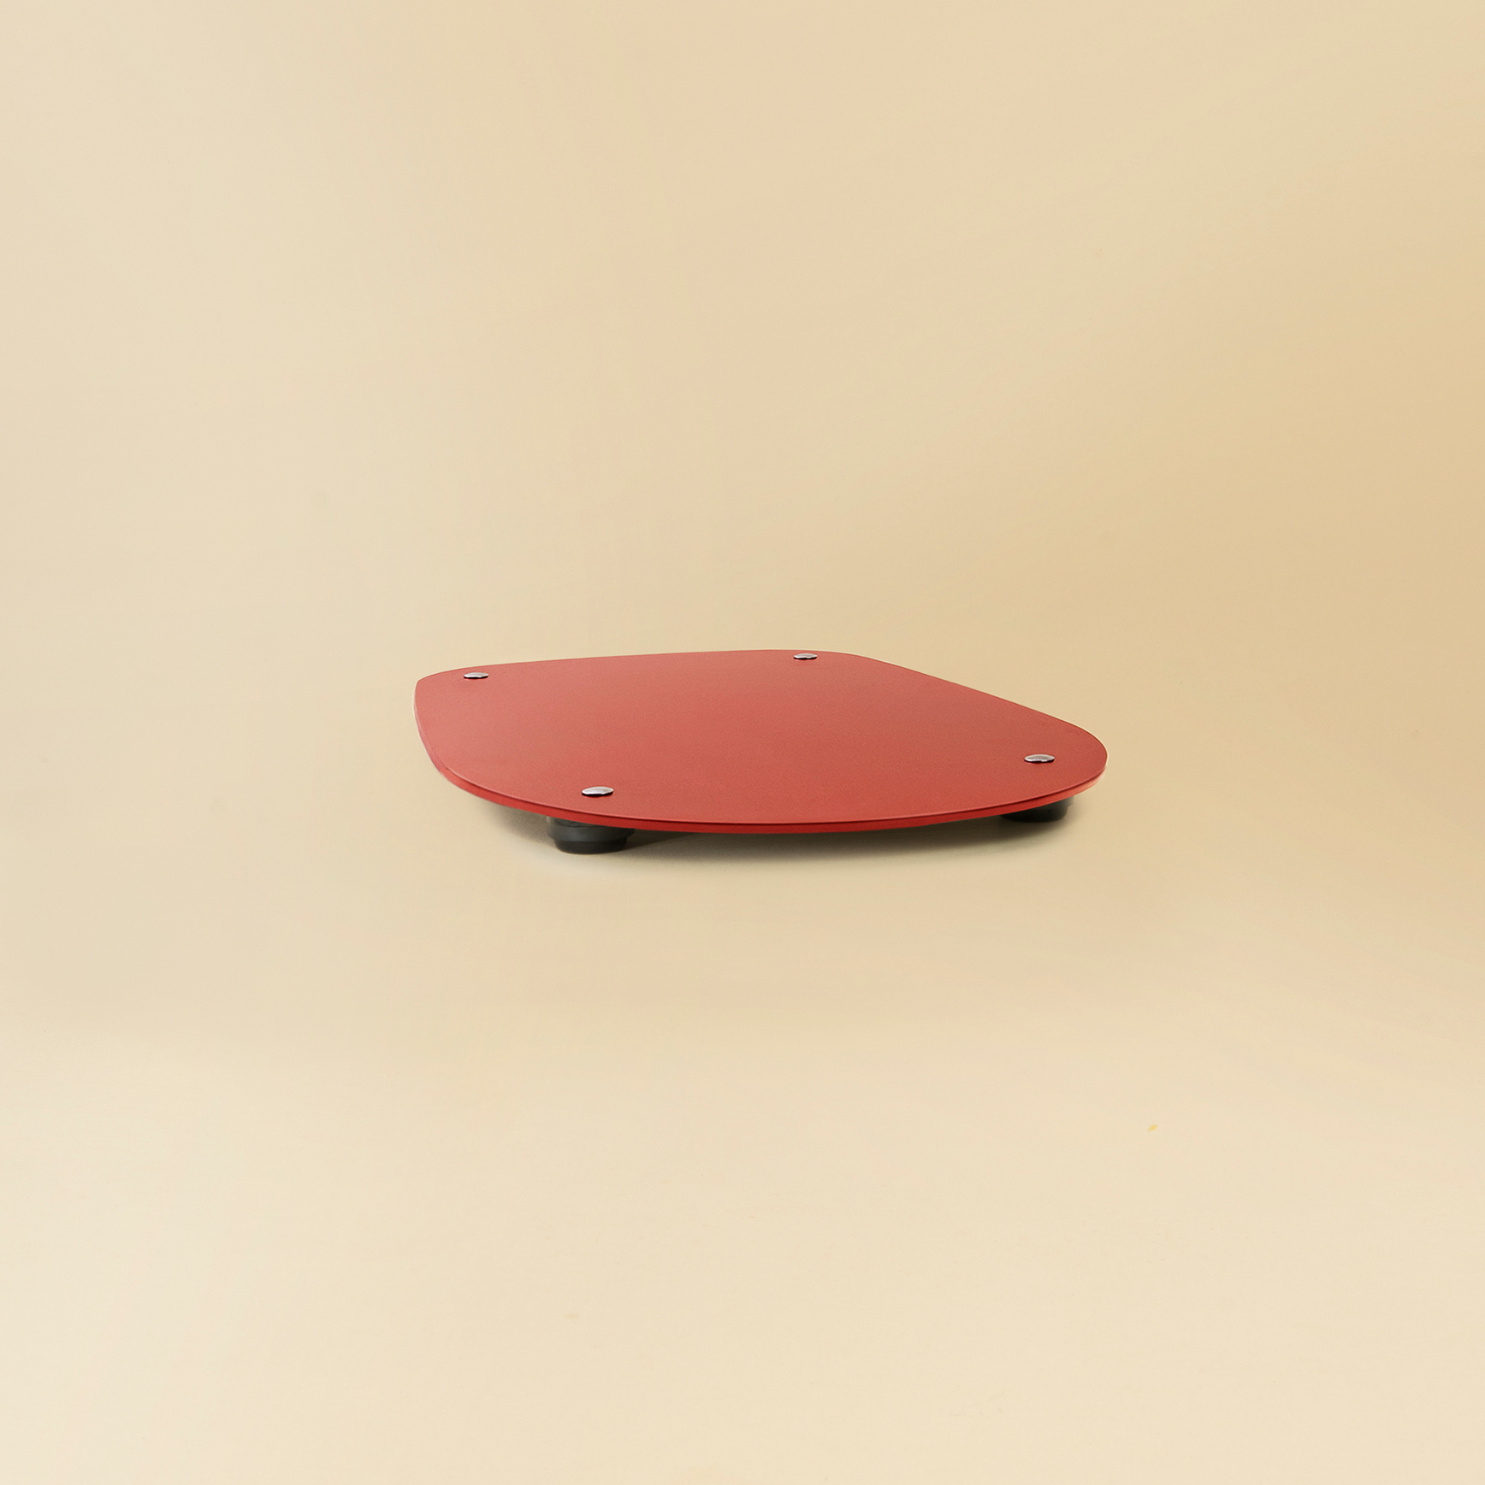 Gliding board for the KitchenAid® food processor in red